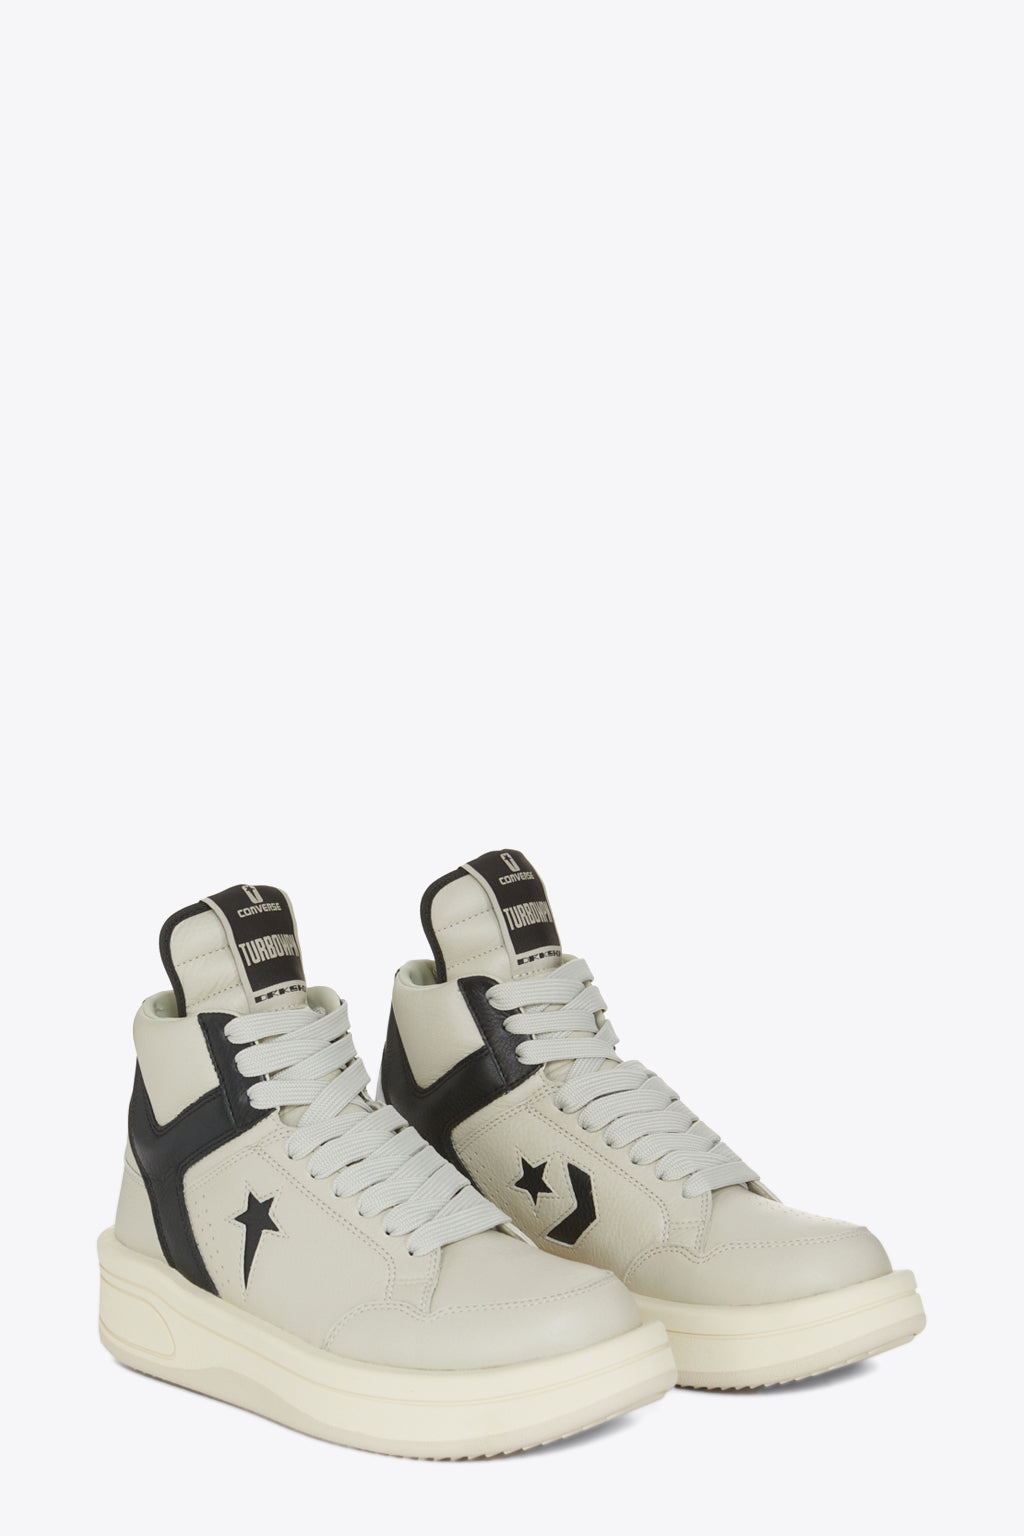 alt-image__Off-white-leather-basket-sneaker-Converse-collab---Turbowpn-